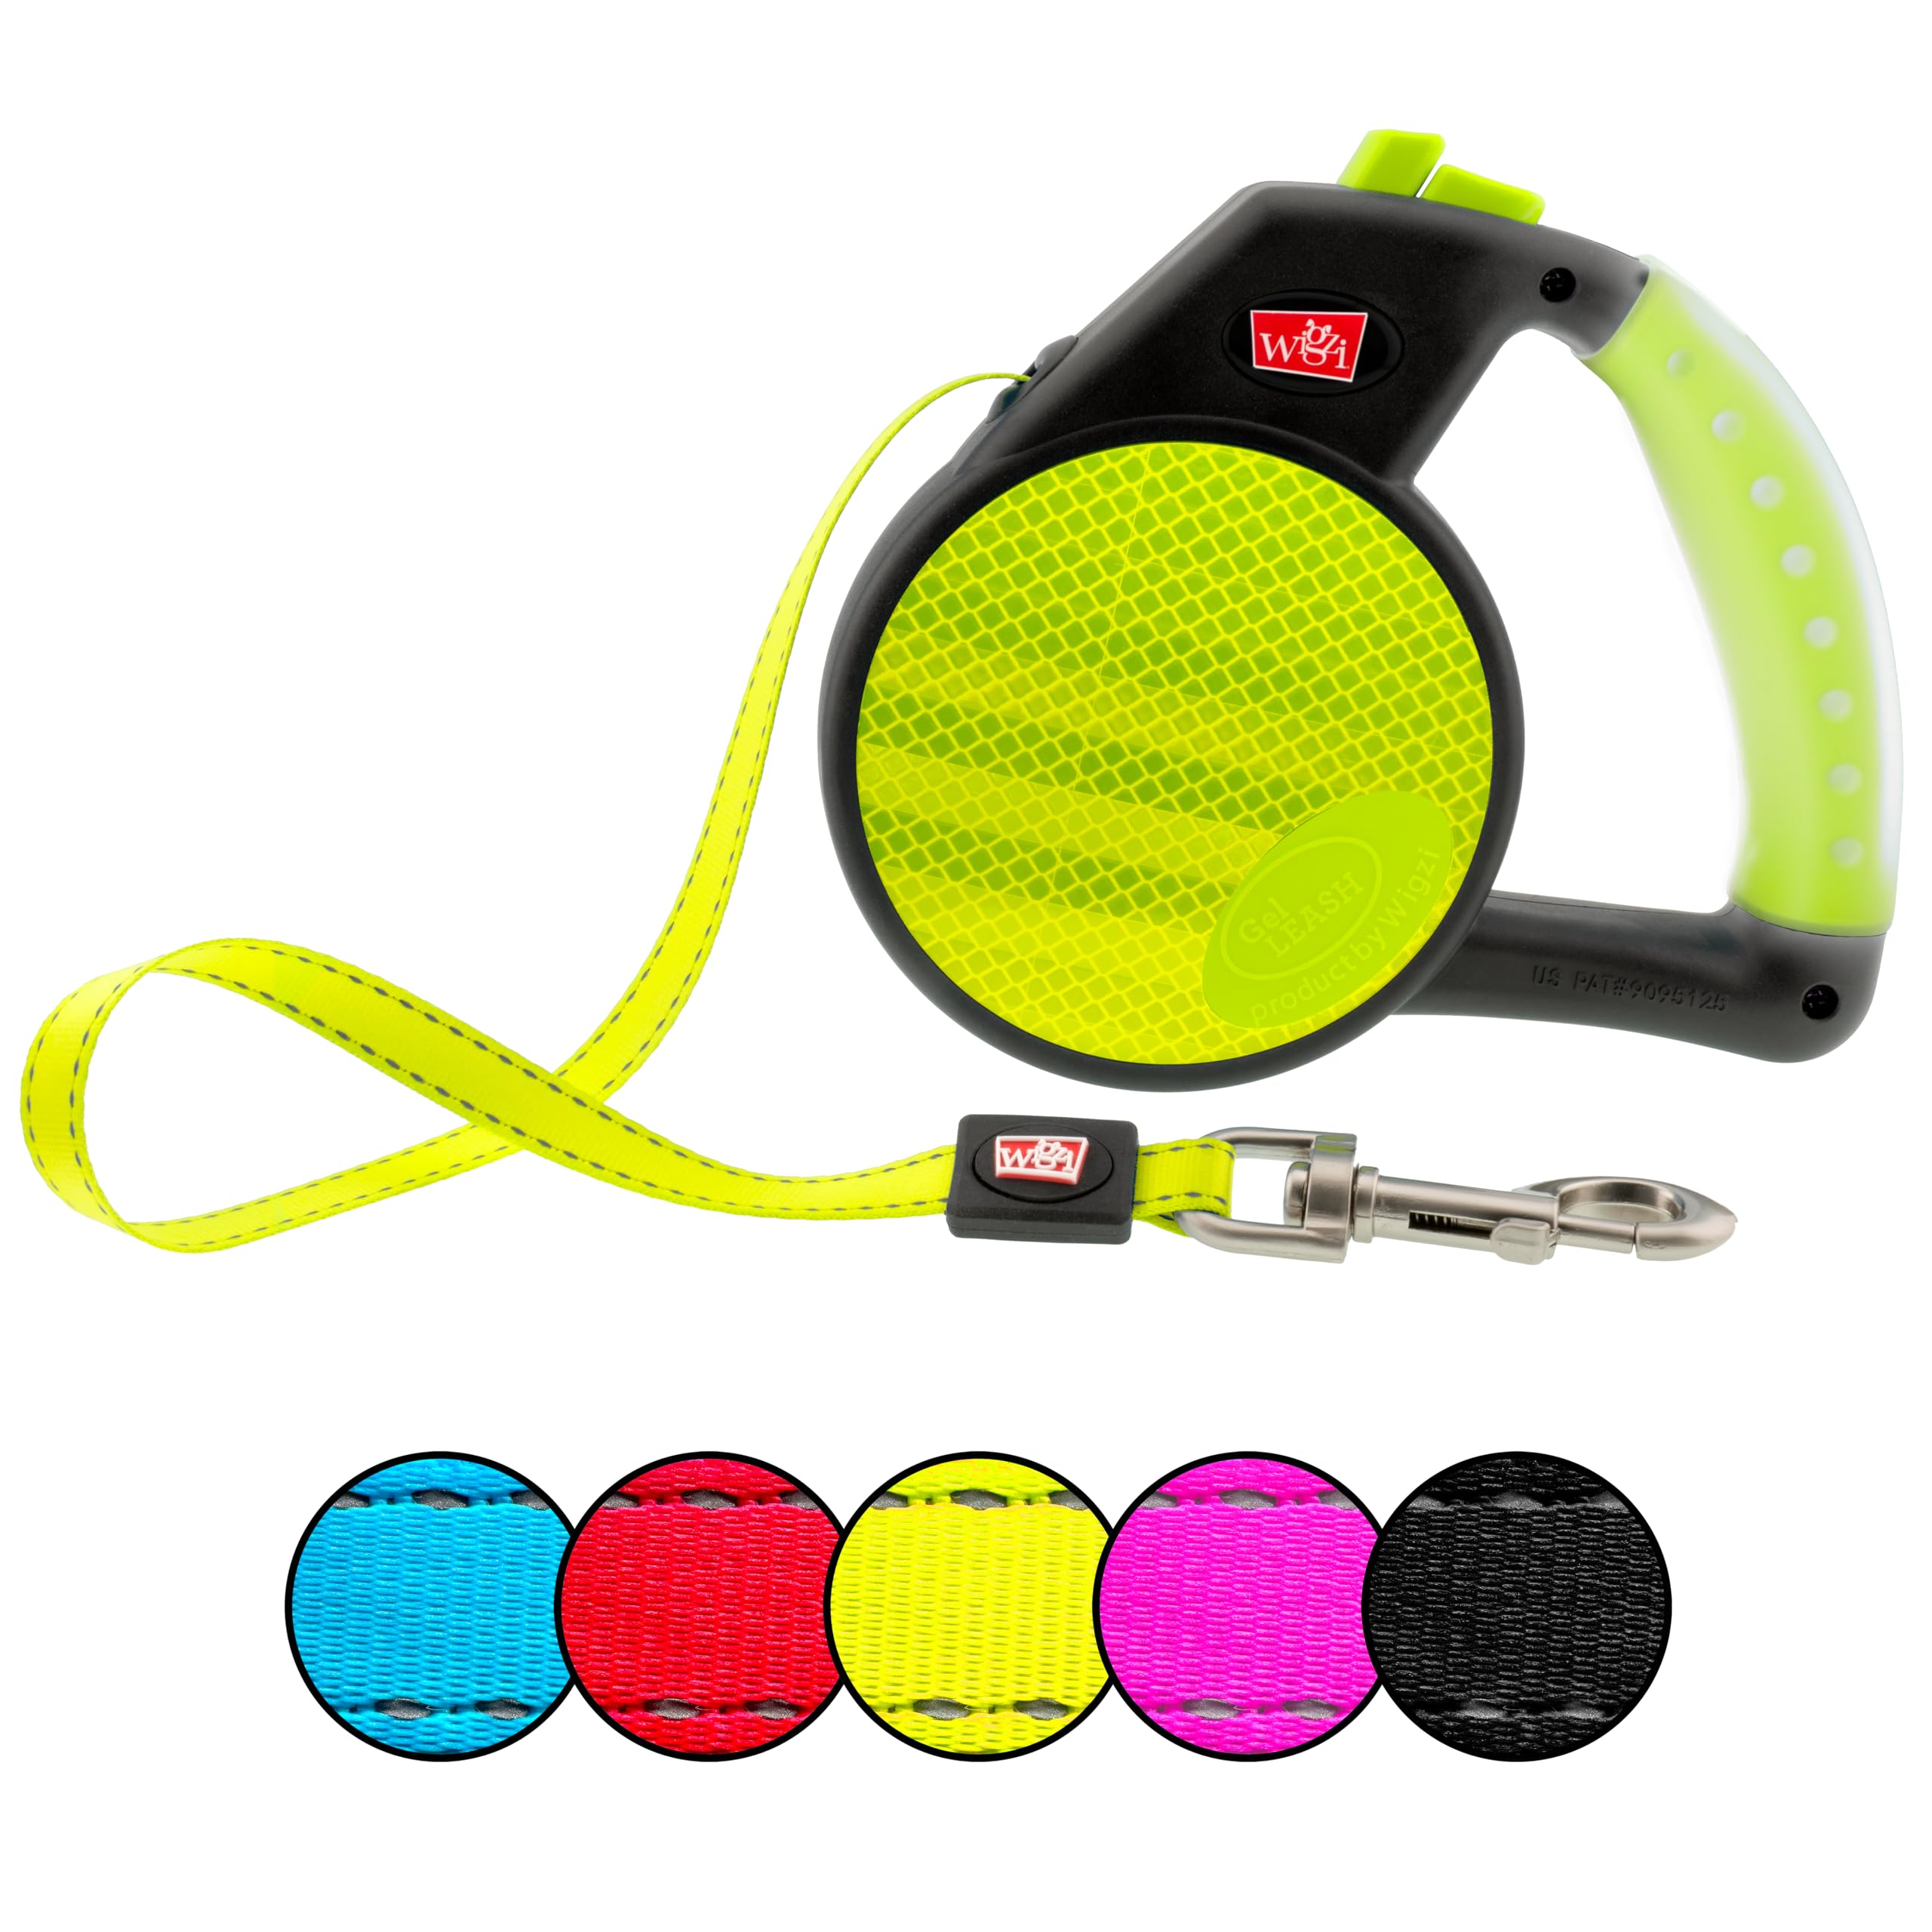 Wigzi Gel Handle Gripped Tape Retractable Nylon Dog Leash - Yellow - Small - Up to 16 Feet  